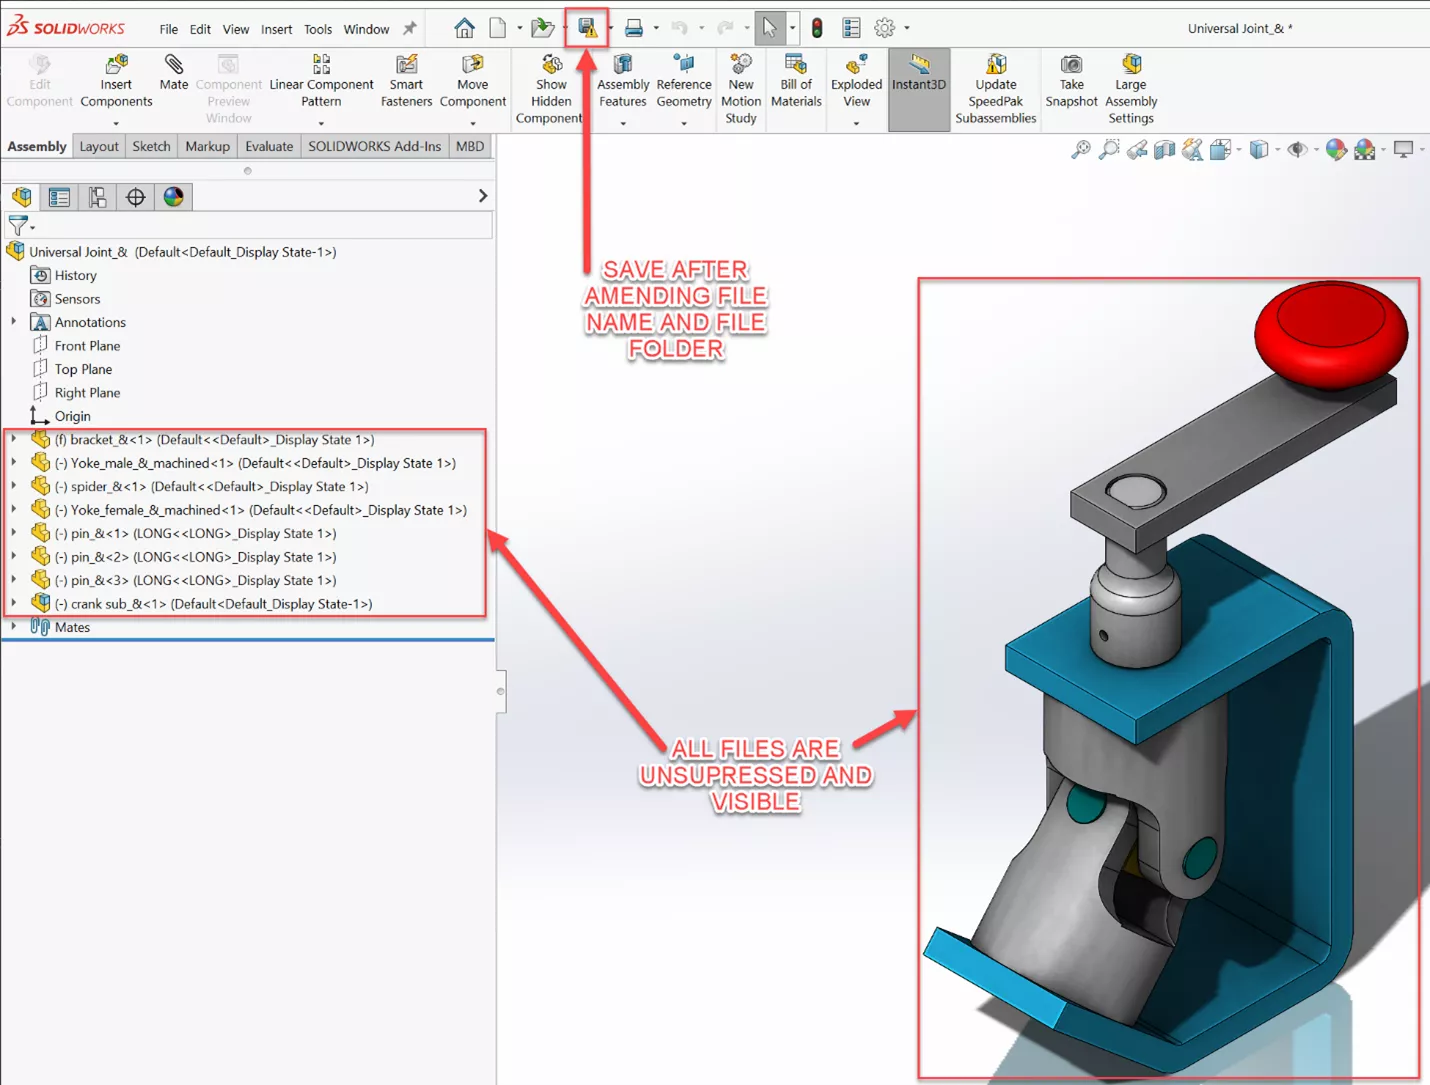 Visible and Unsupressed Files in SOLIDWORKS